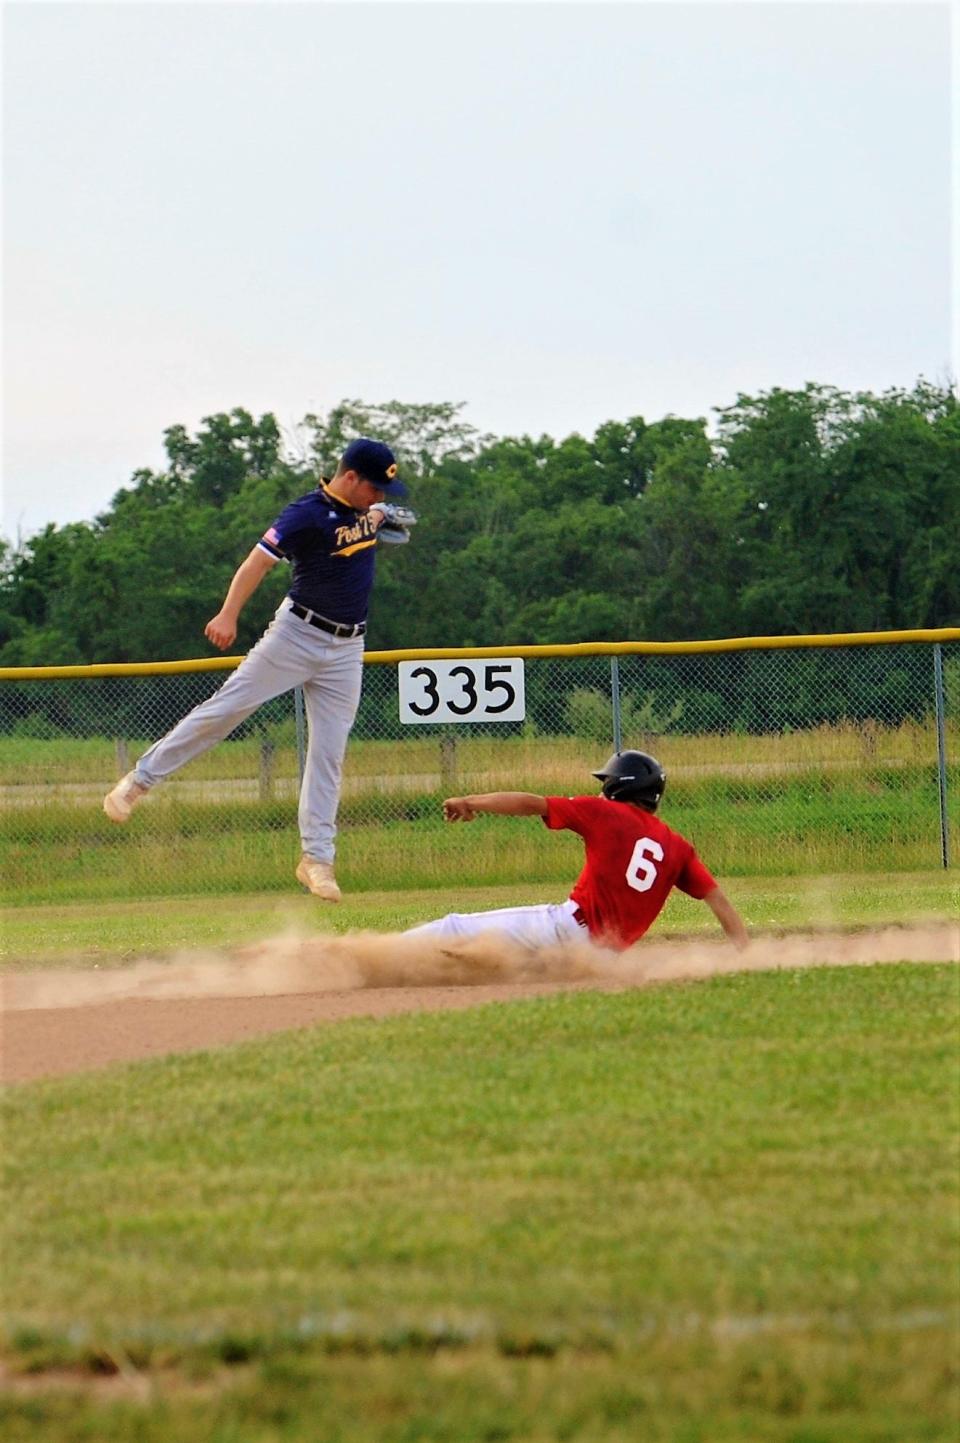 Post 757's David Magill making a leaping catch hoping to catch a Hillsboro runner stealing.